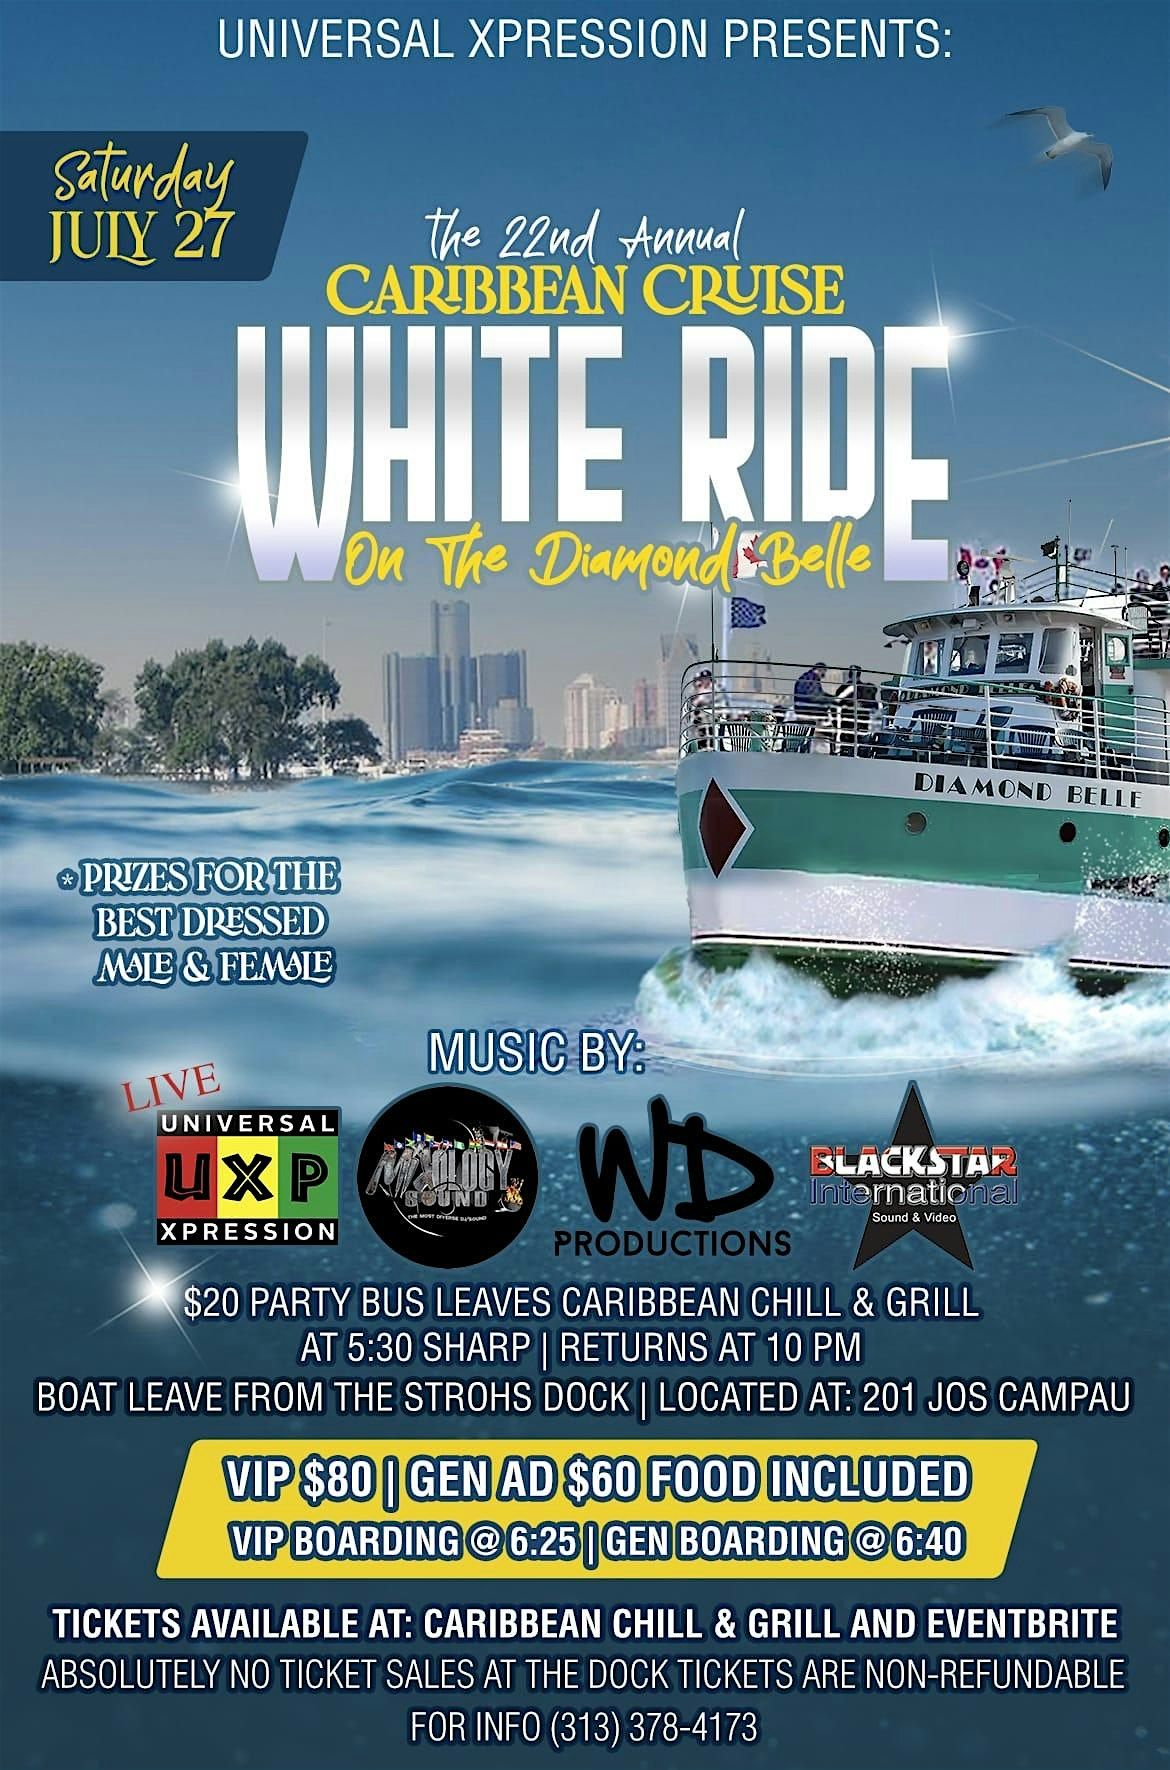 The 22nd annual Caribbean Cruise all white ride